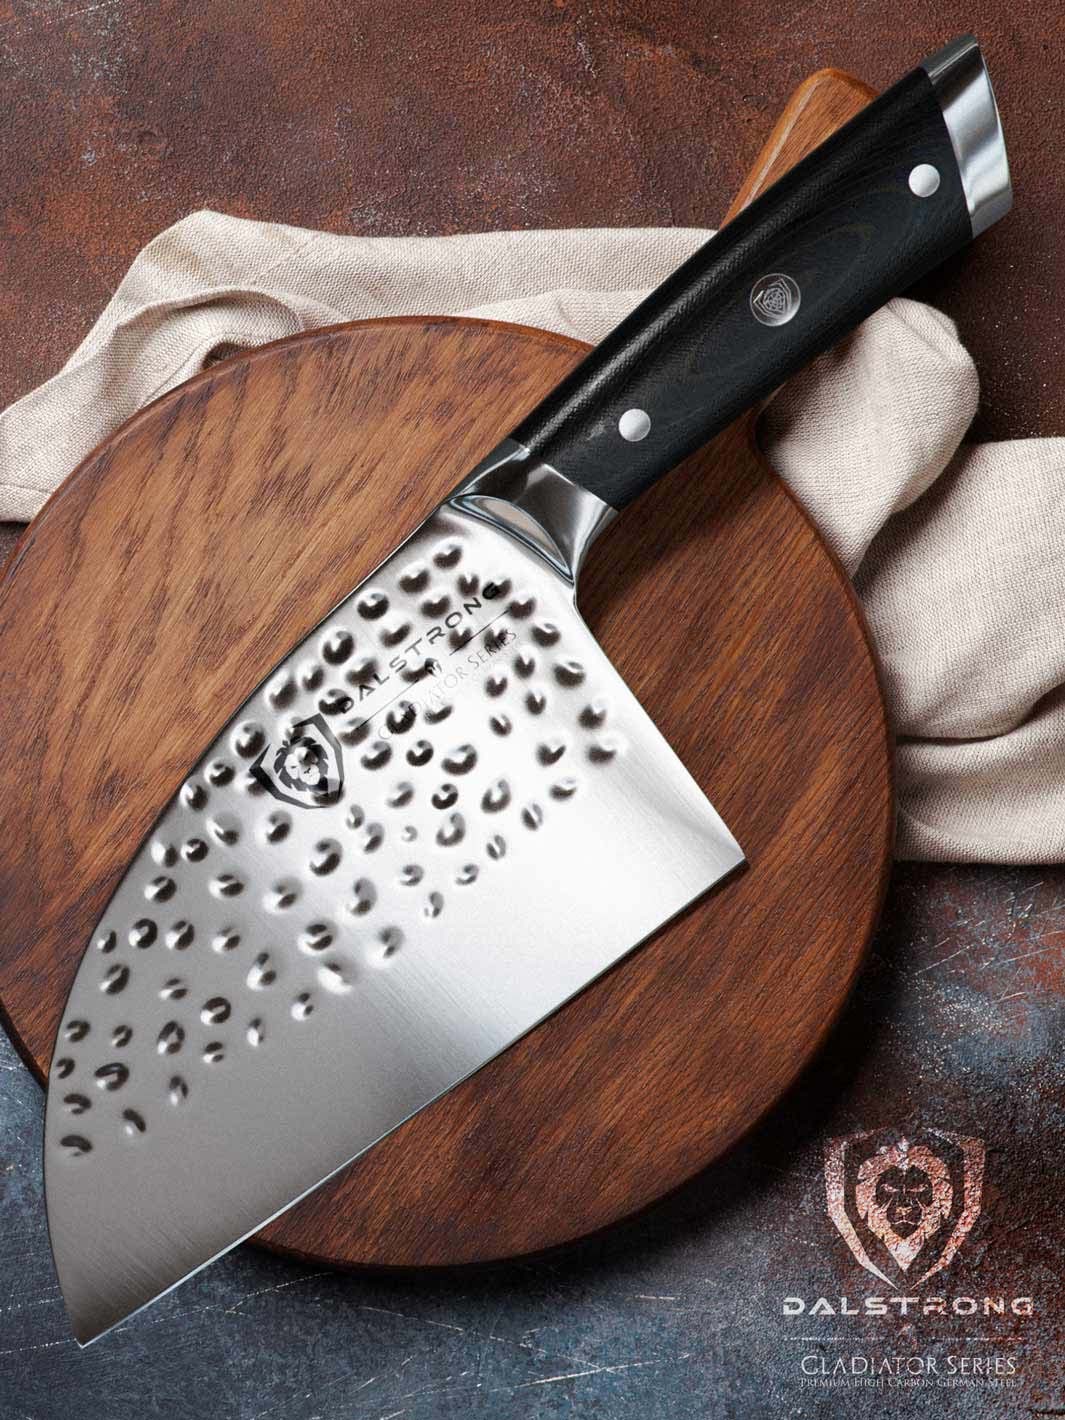 Dalstrong gladiator series 7.5 inch serbian knife with black handle on top of a round wooden cutting board.